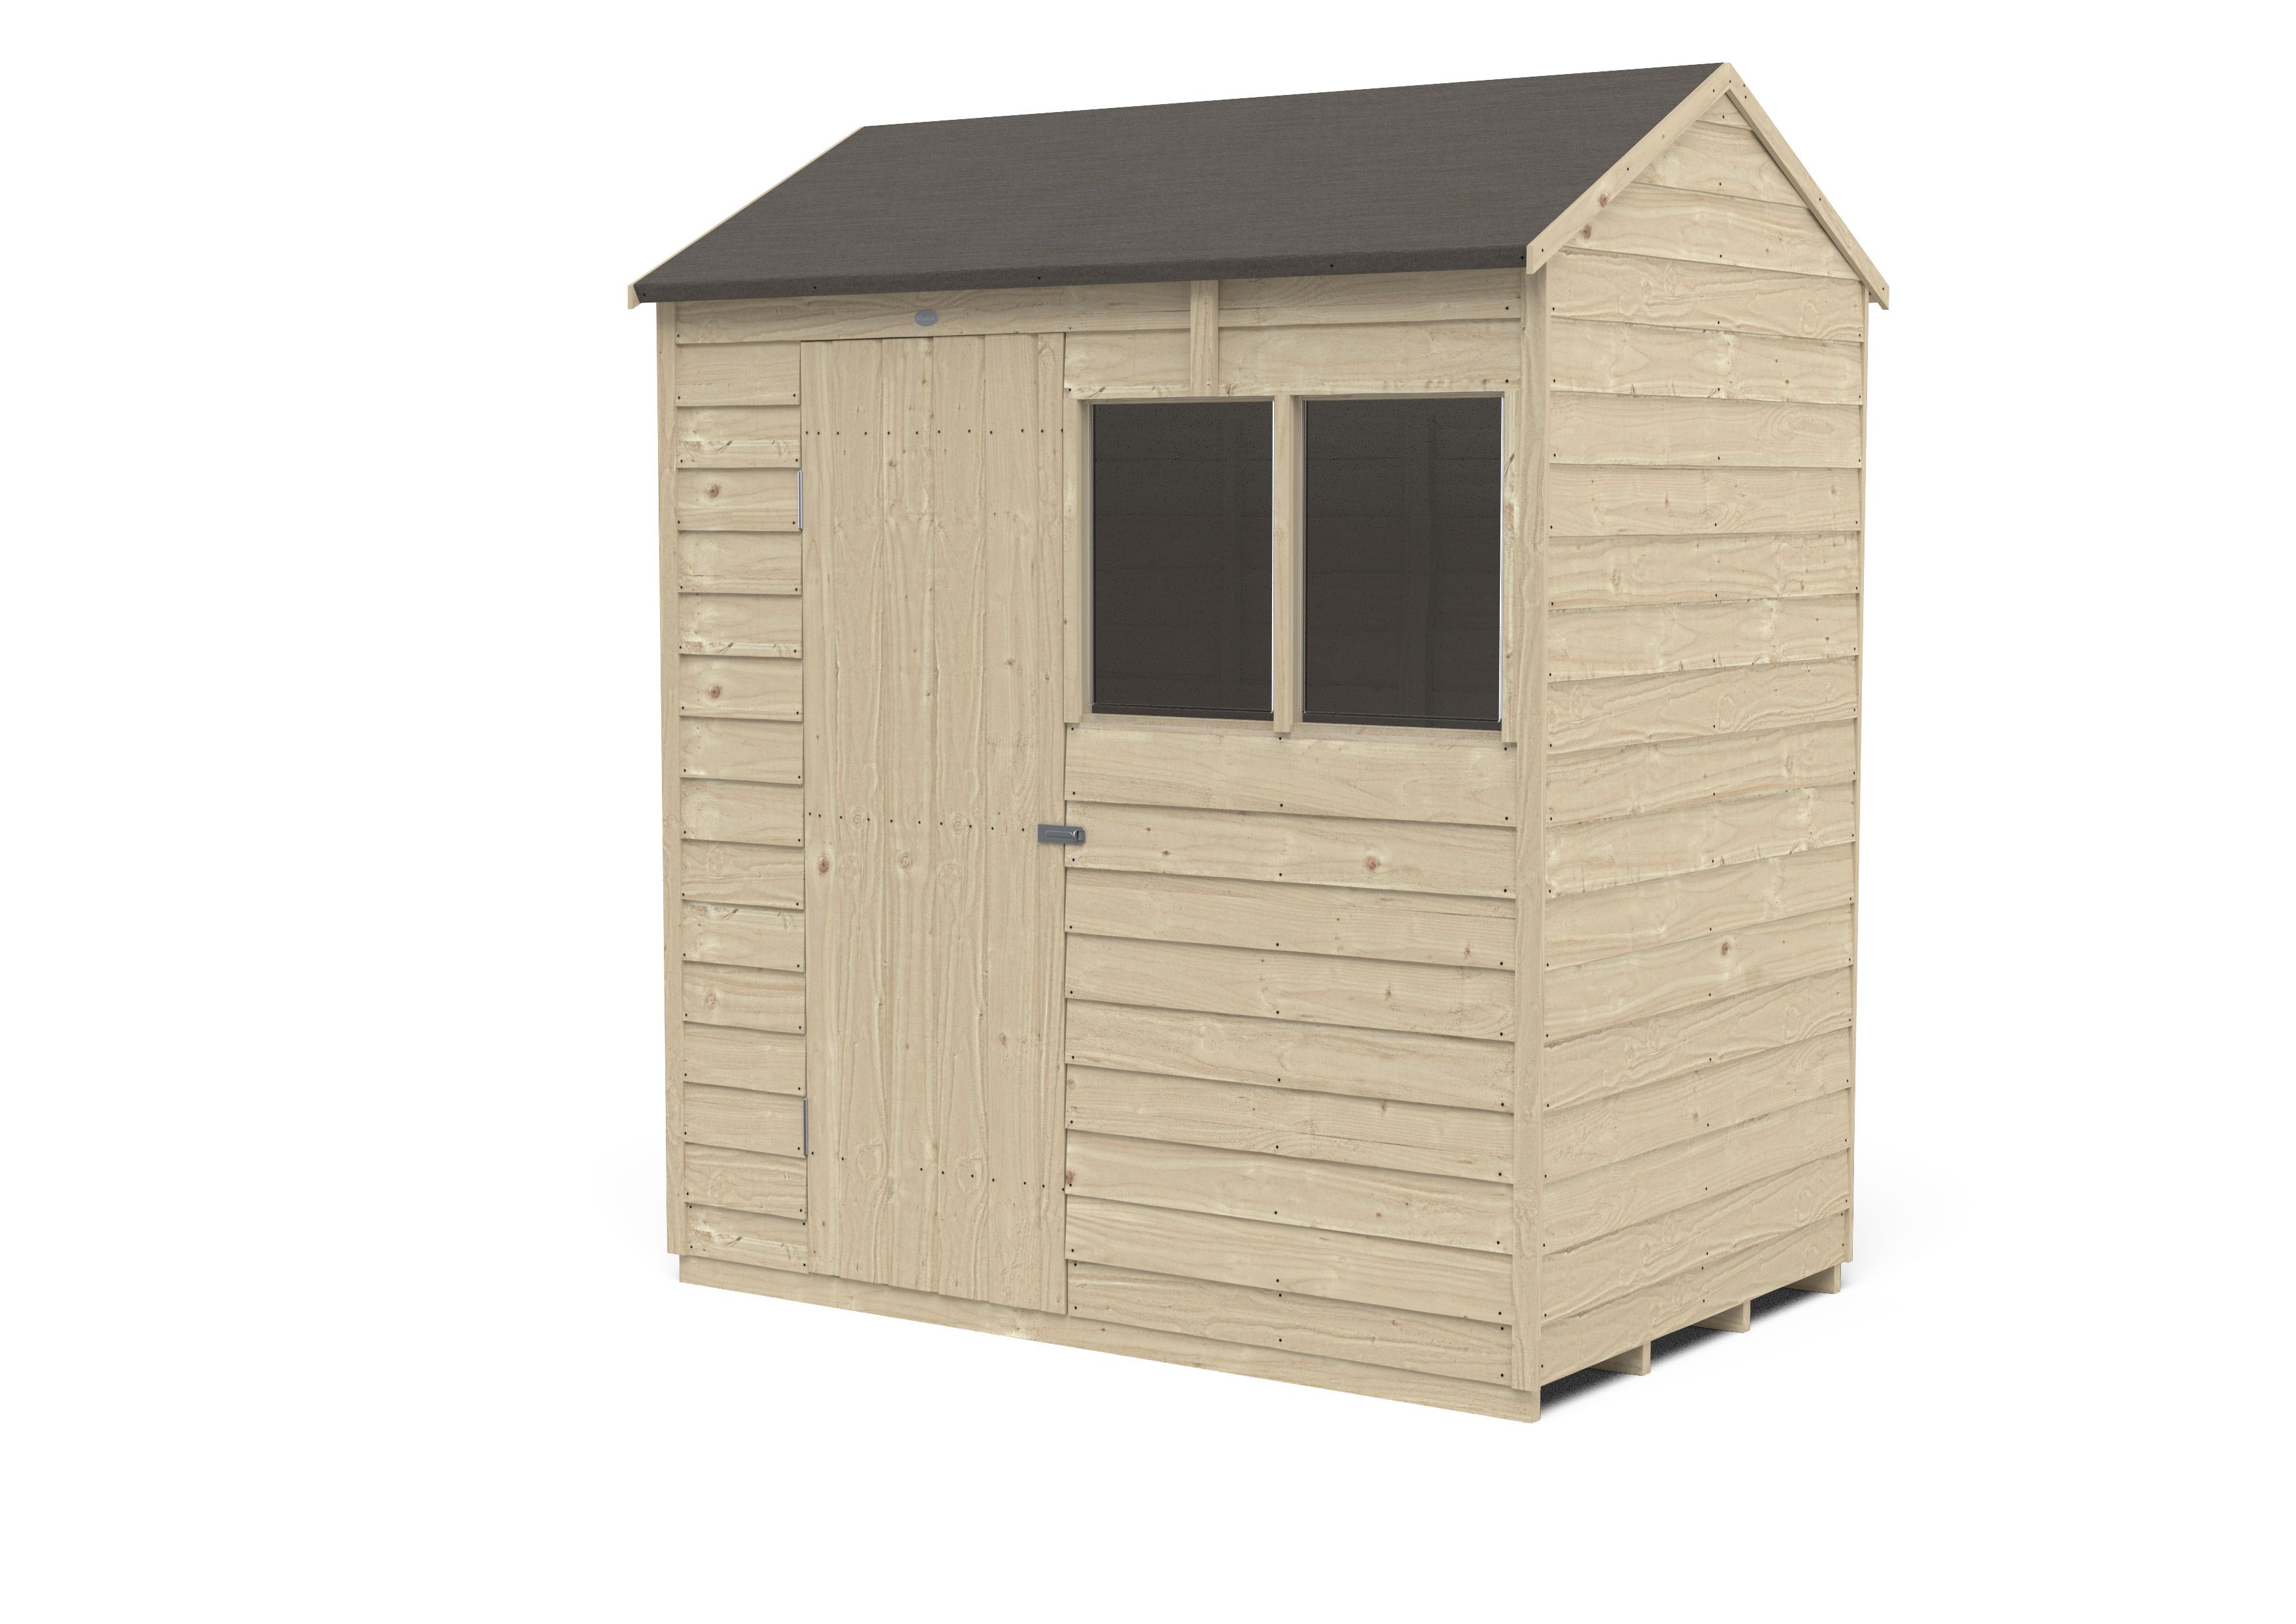 Forest Garden Overlap 6x4 ft Reverse apex Wooden Pressure treated Shed with floor & 2 windows